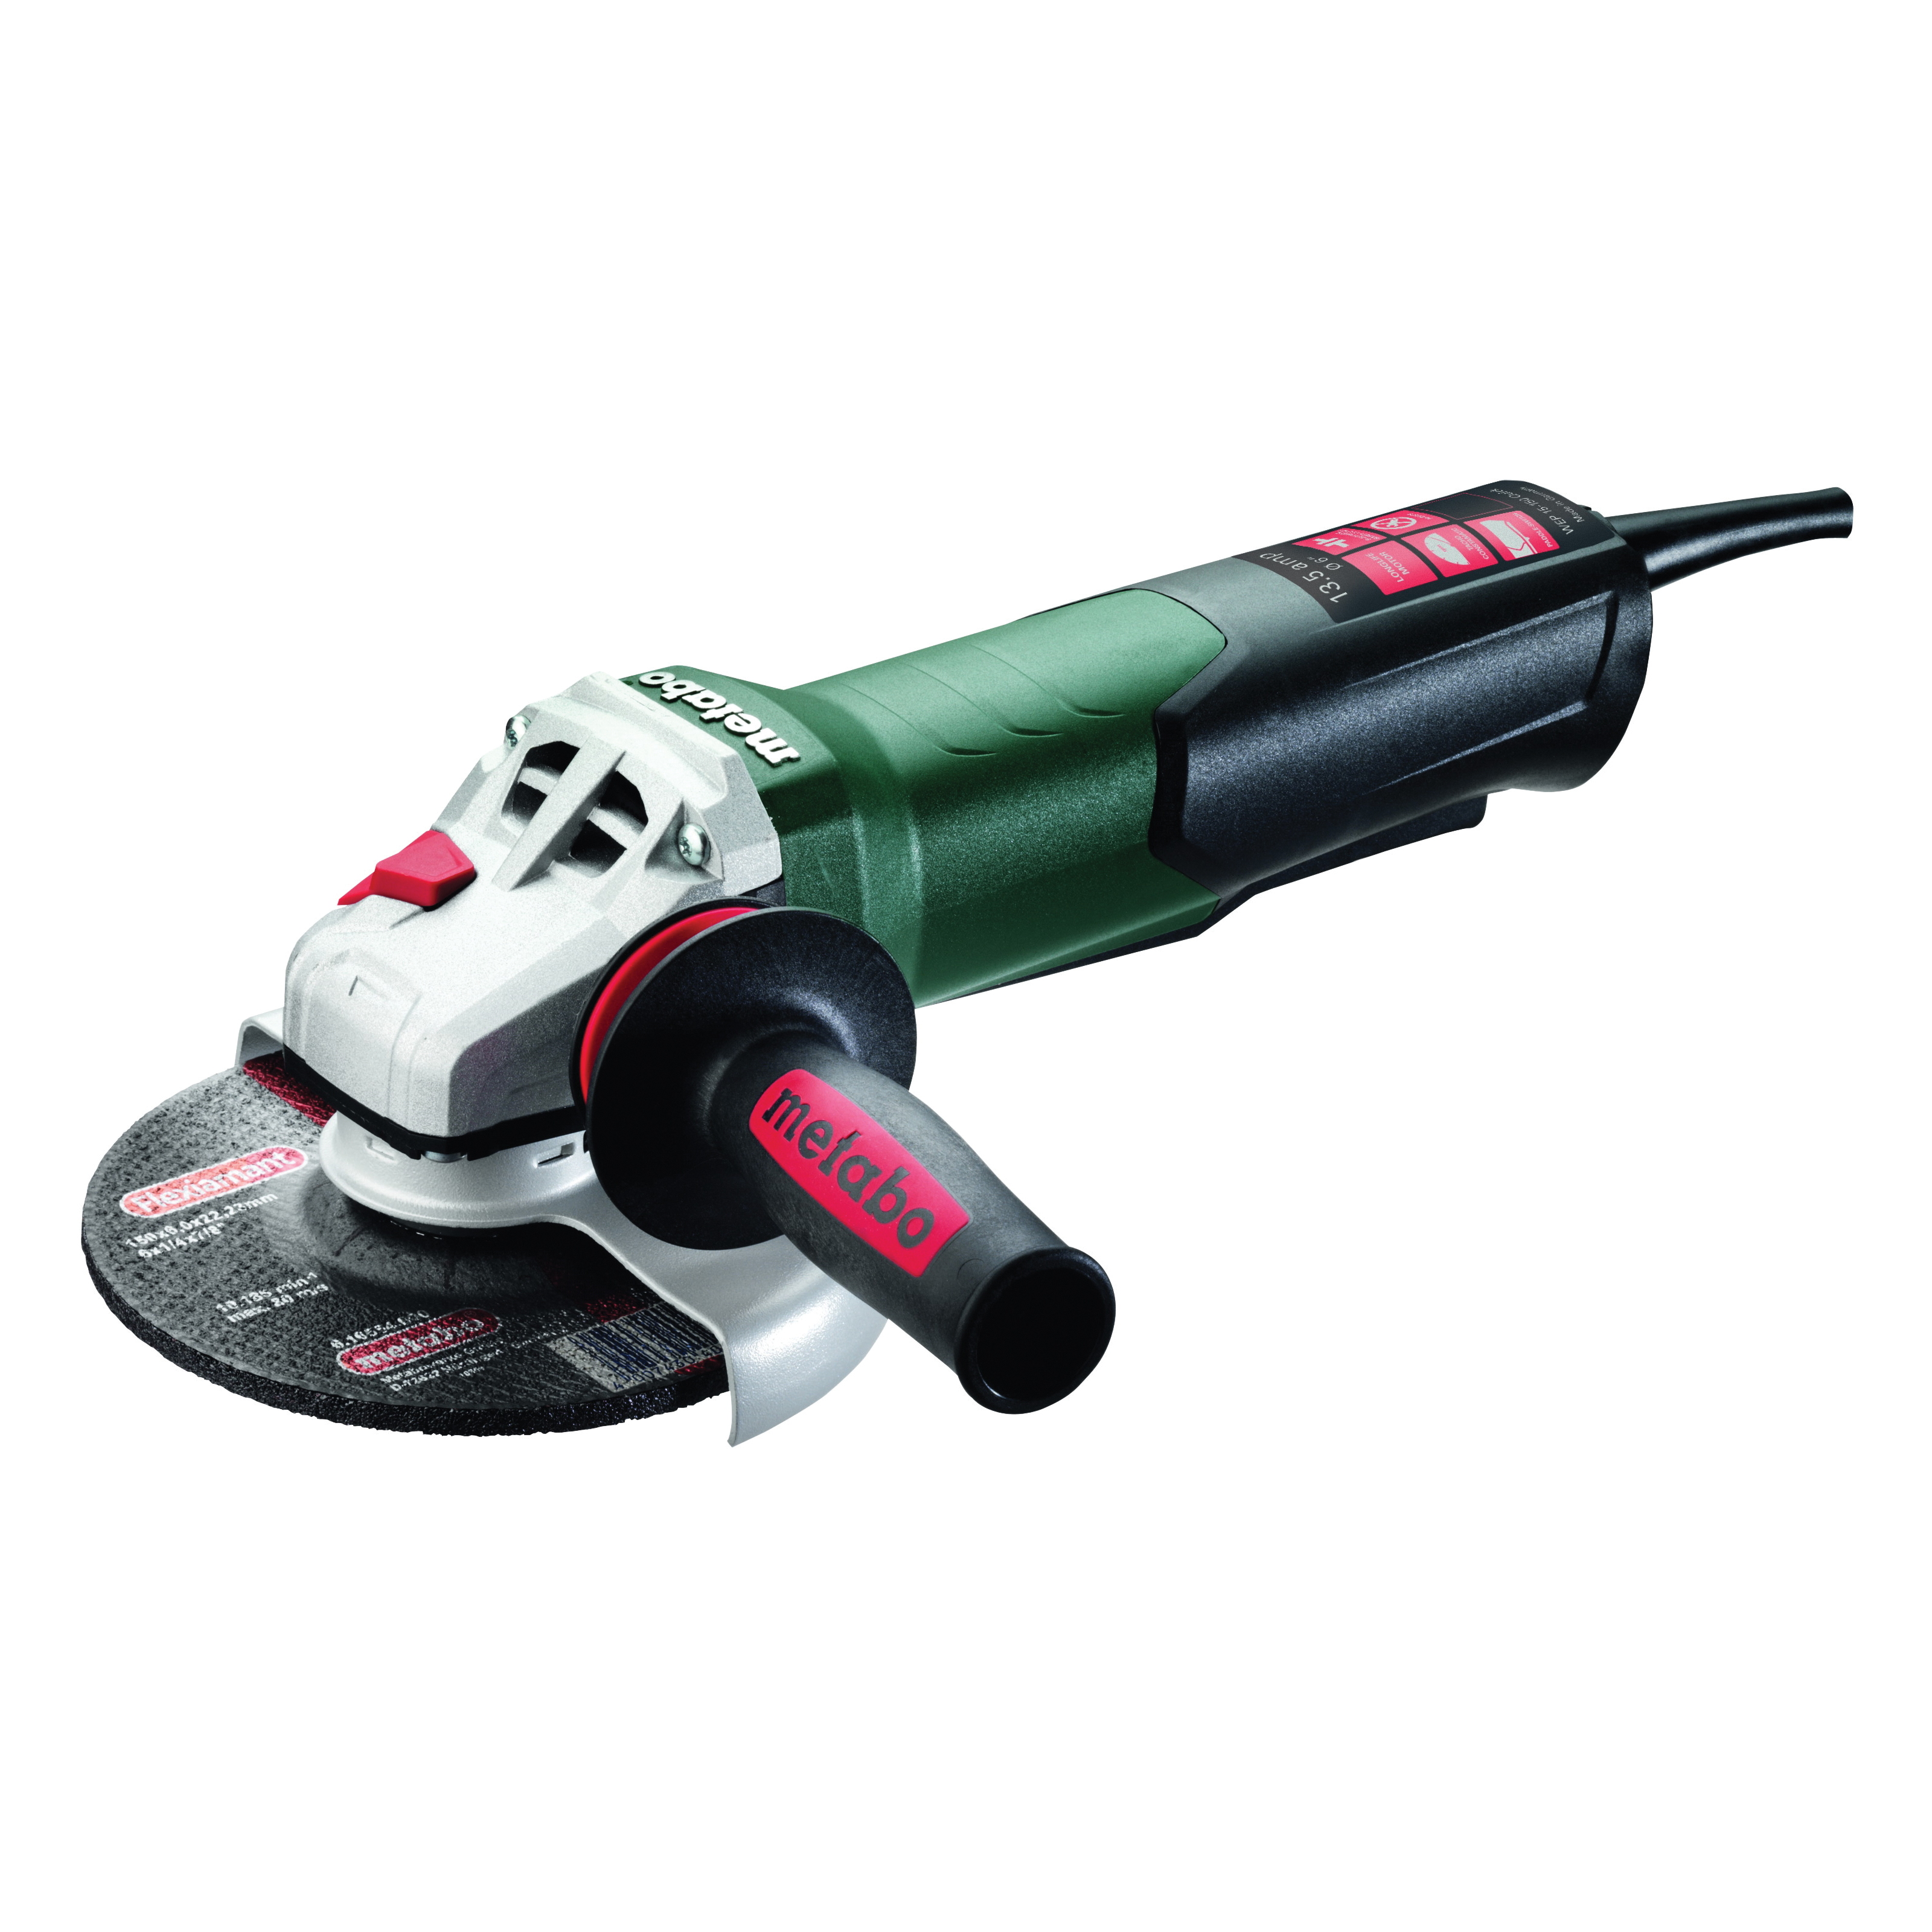 metabo® 600488420 Electric Angle Grinder, 6 in Dia Wheel, 5/8-11 UNC Arbor/Shank, 110 to 120 VAC